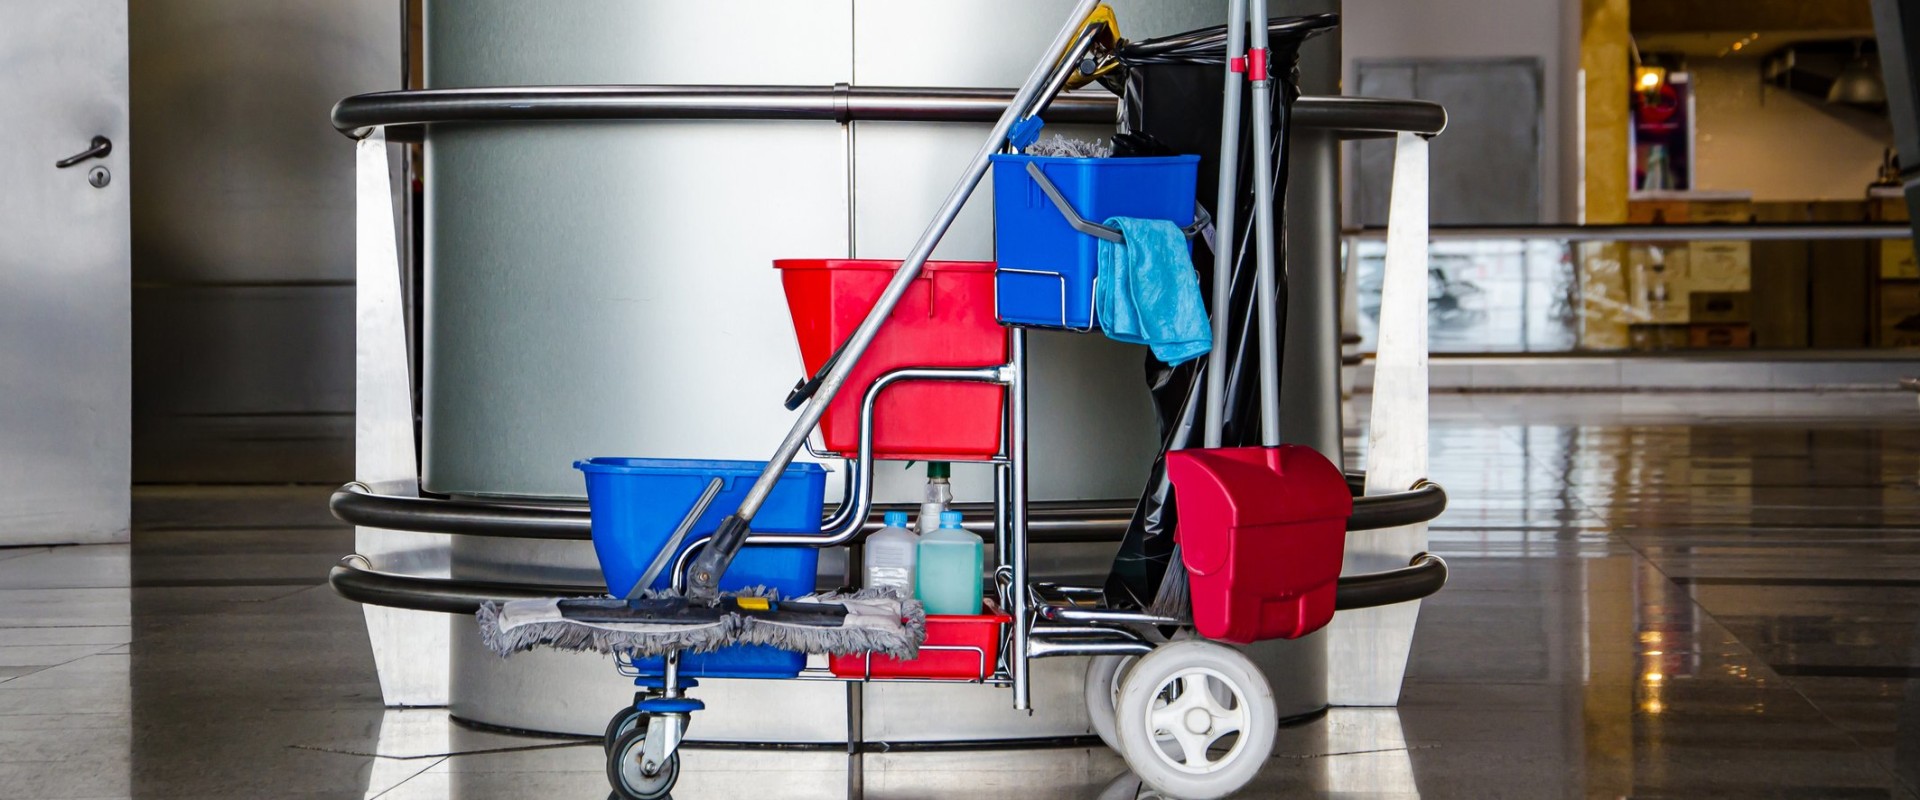 Starting a Cleaning Business in Austin, Texas: A Step-by-Step Guide